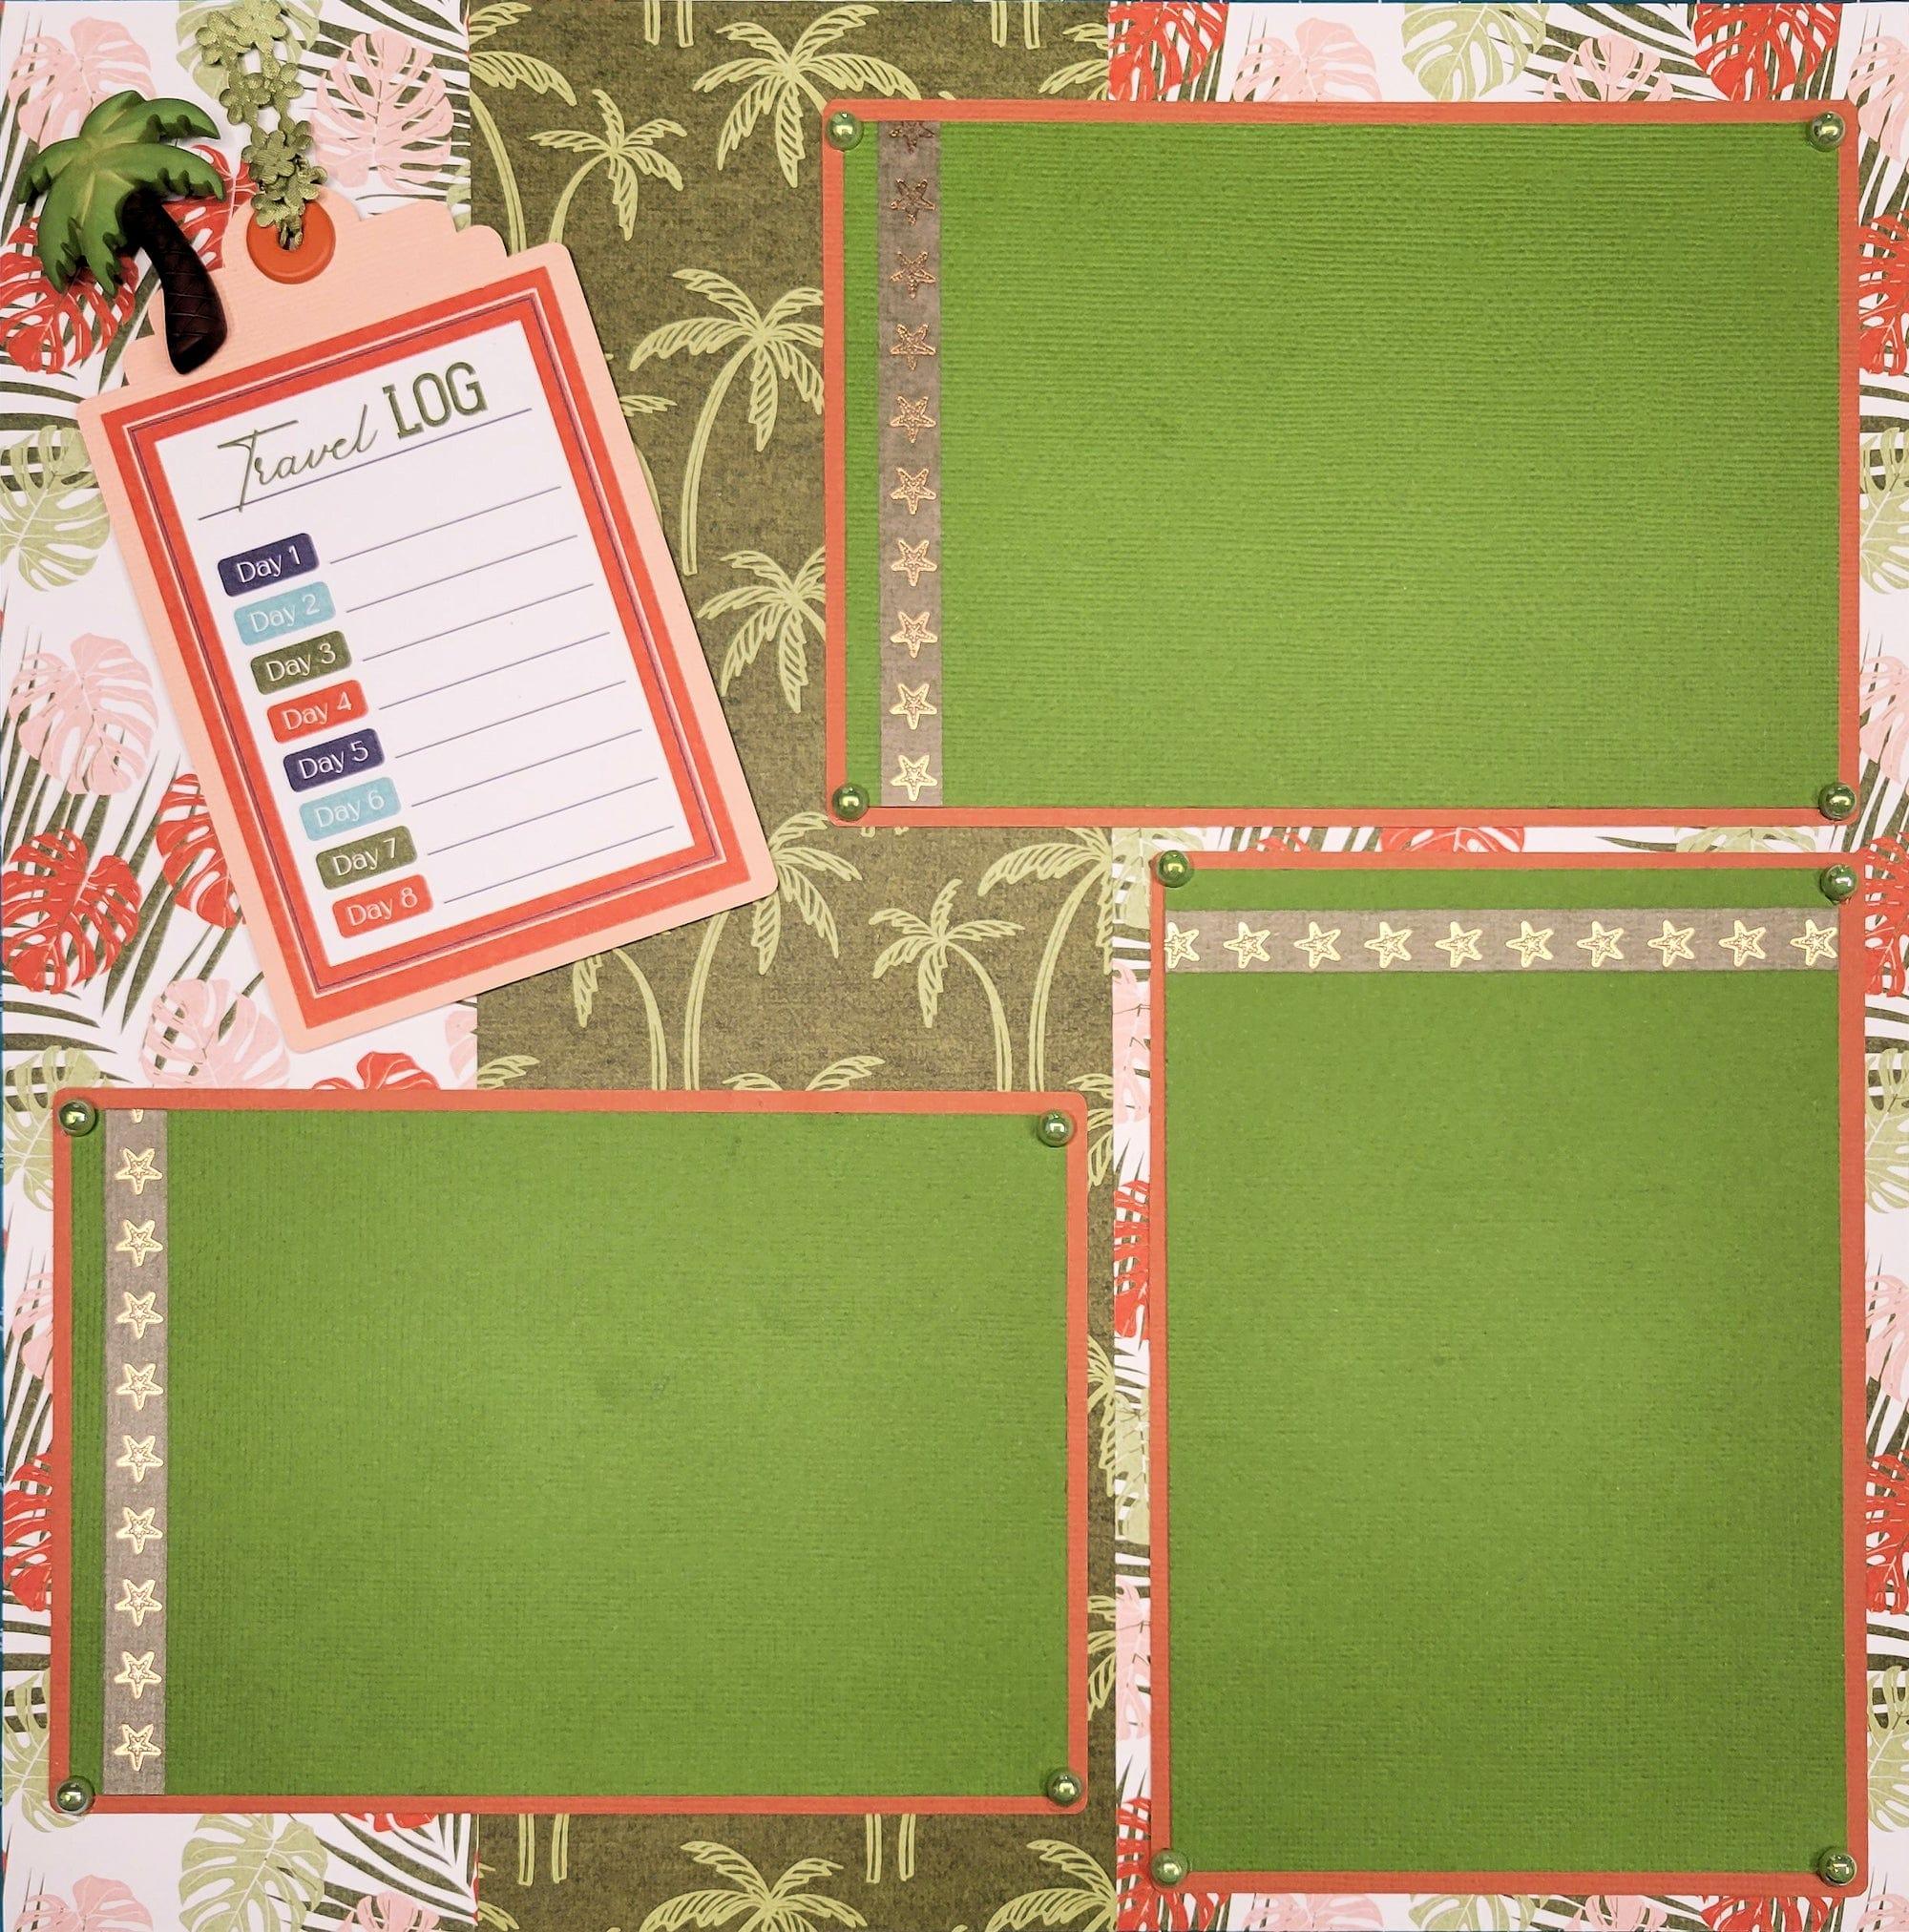 Tropical Paradise Premade Embellished Two-Page 12 x 12 Scrapbook Premade by SSC Designs - Scrapbook Supply Companies